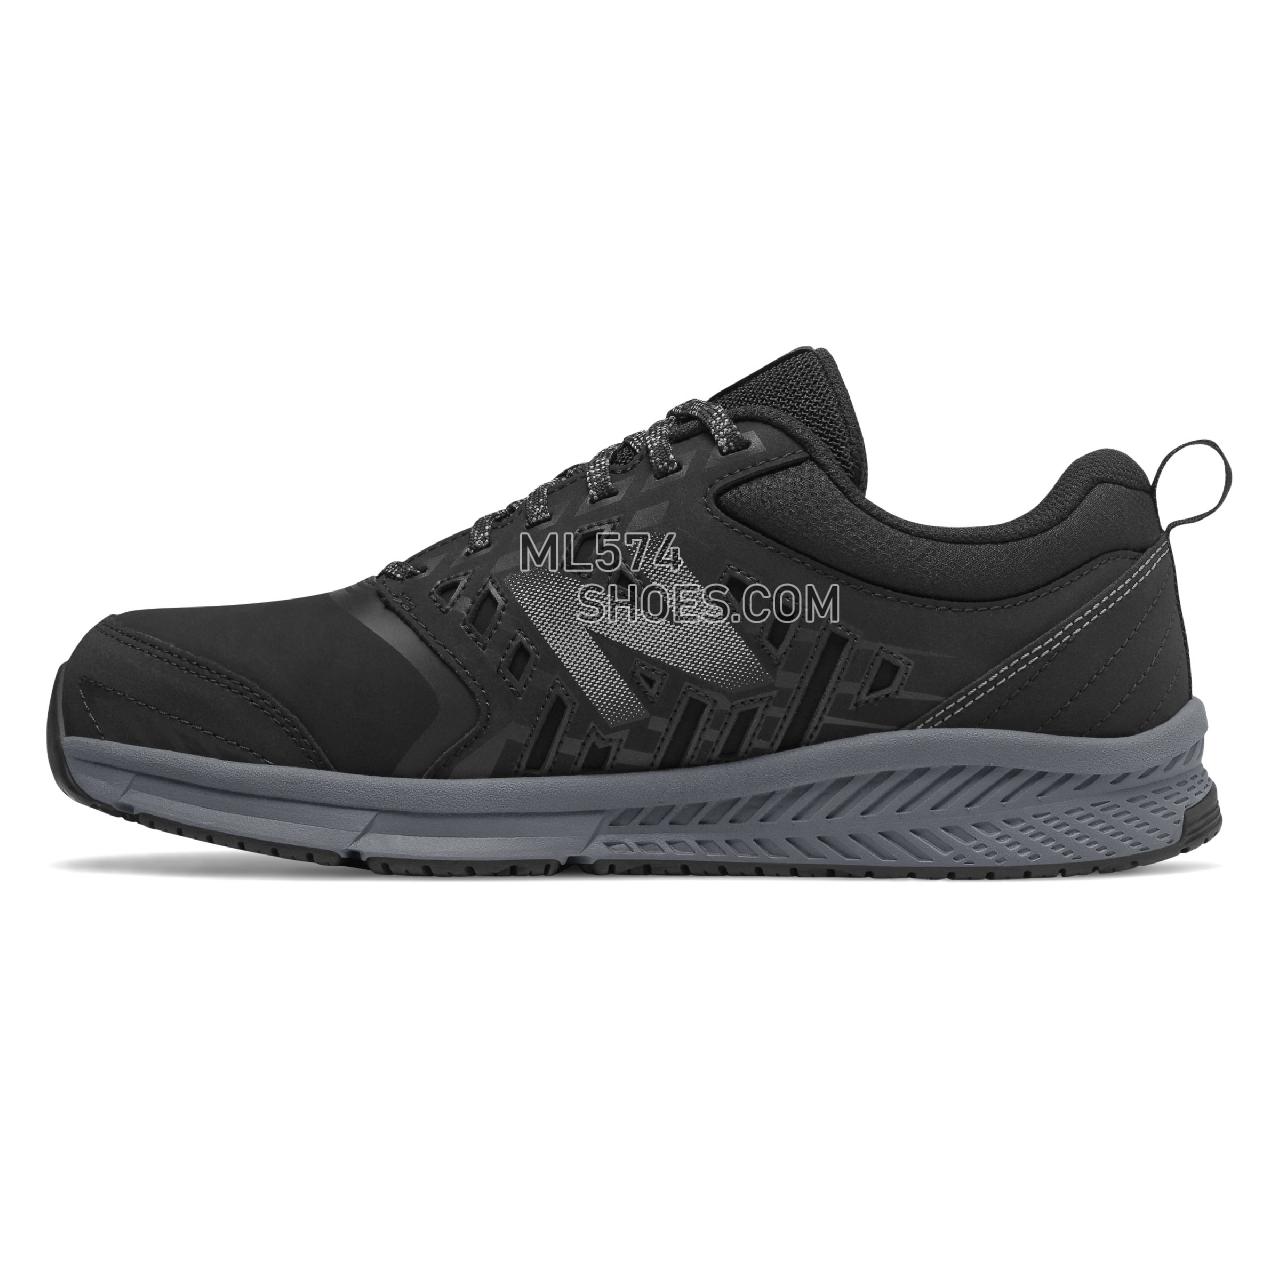 New Balance 412 Alloy Toe - Men's Sandals - Black with Silver - MID412B1